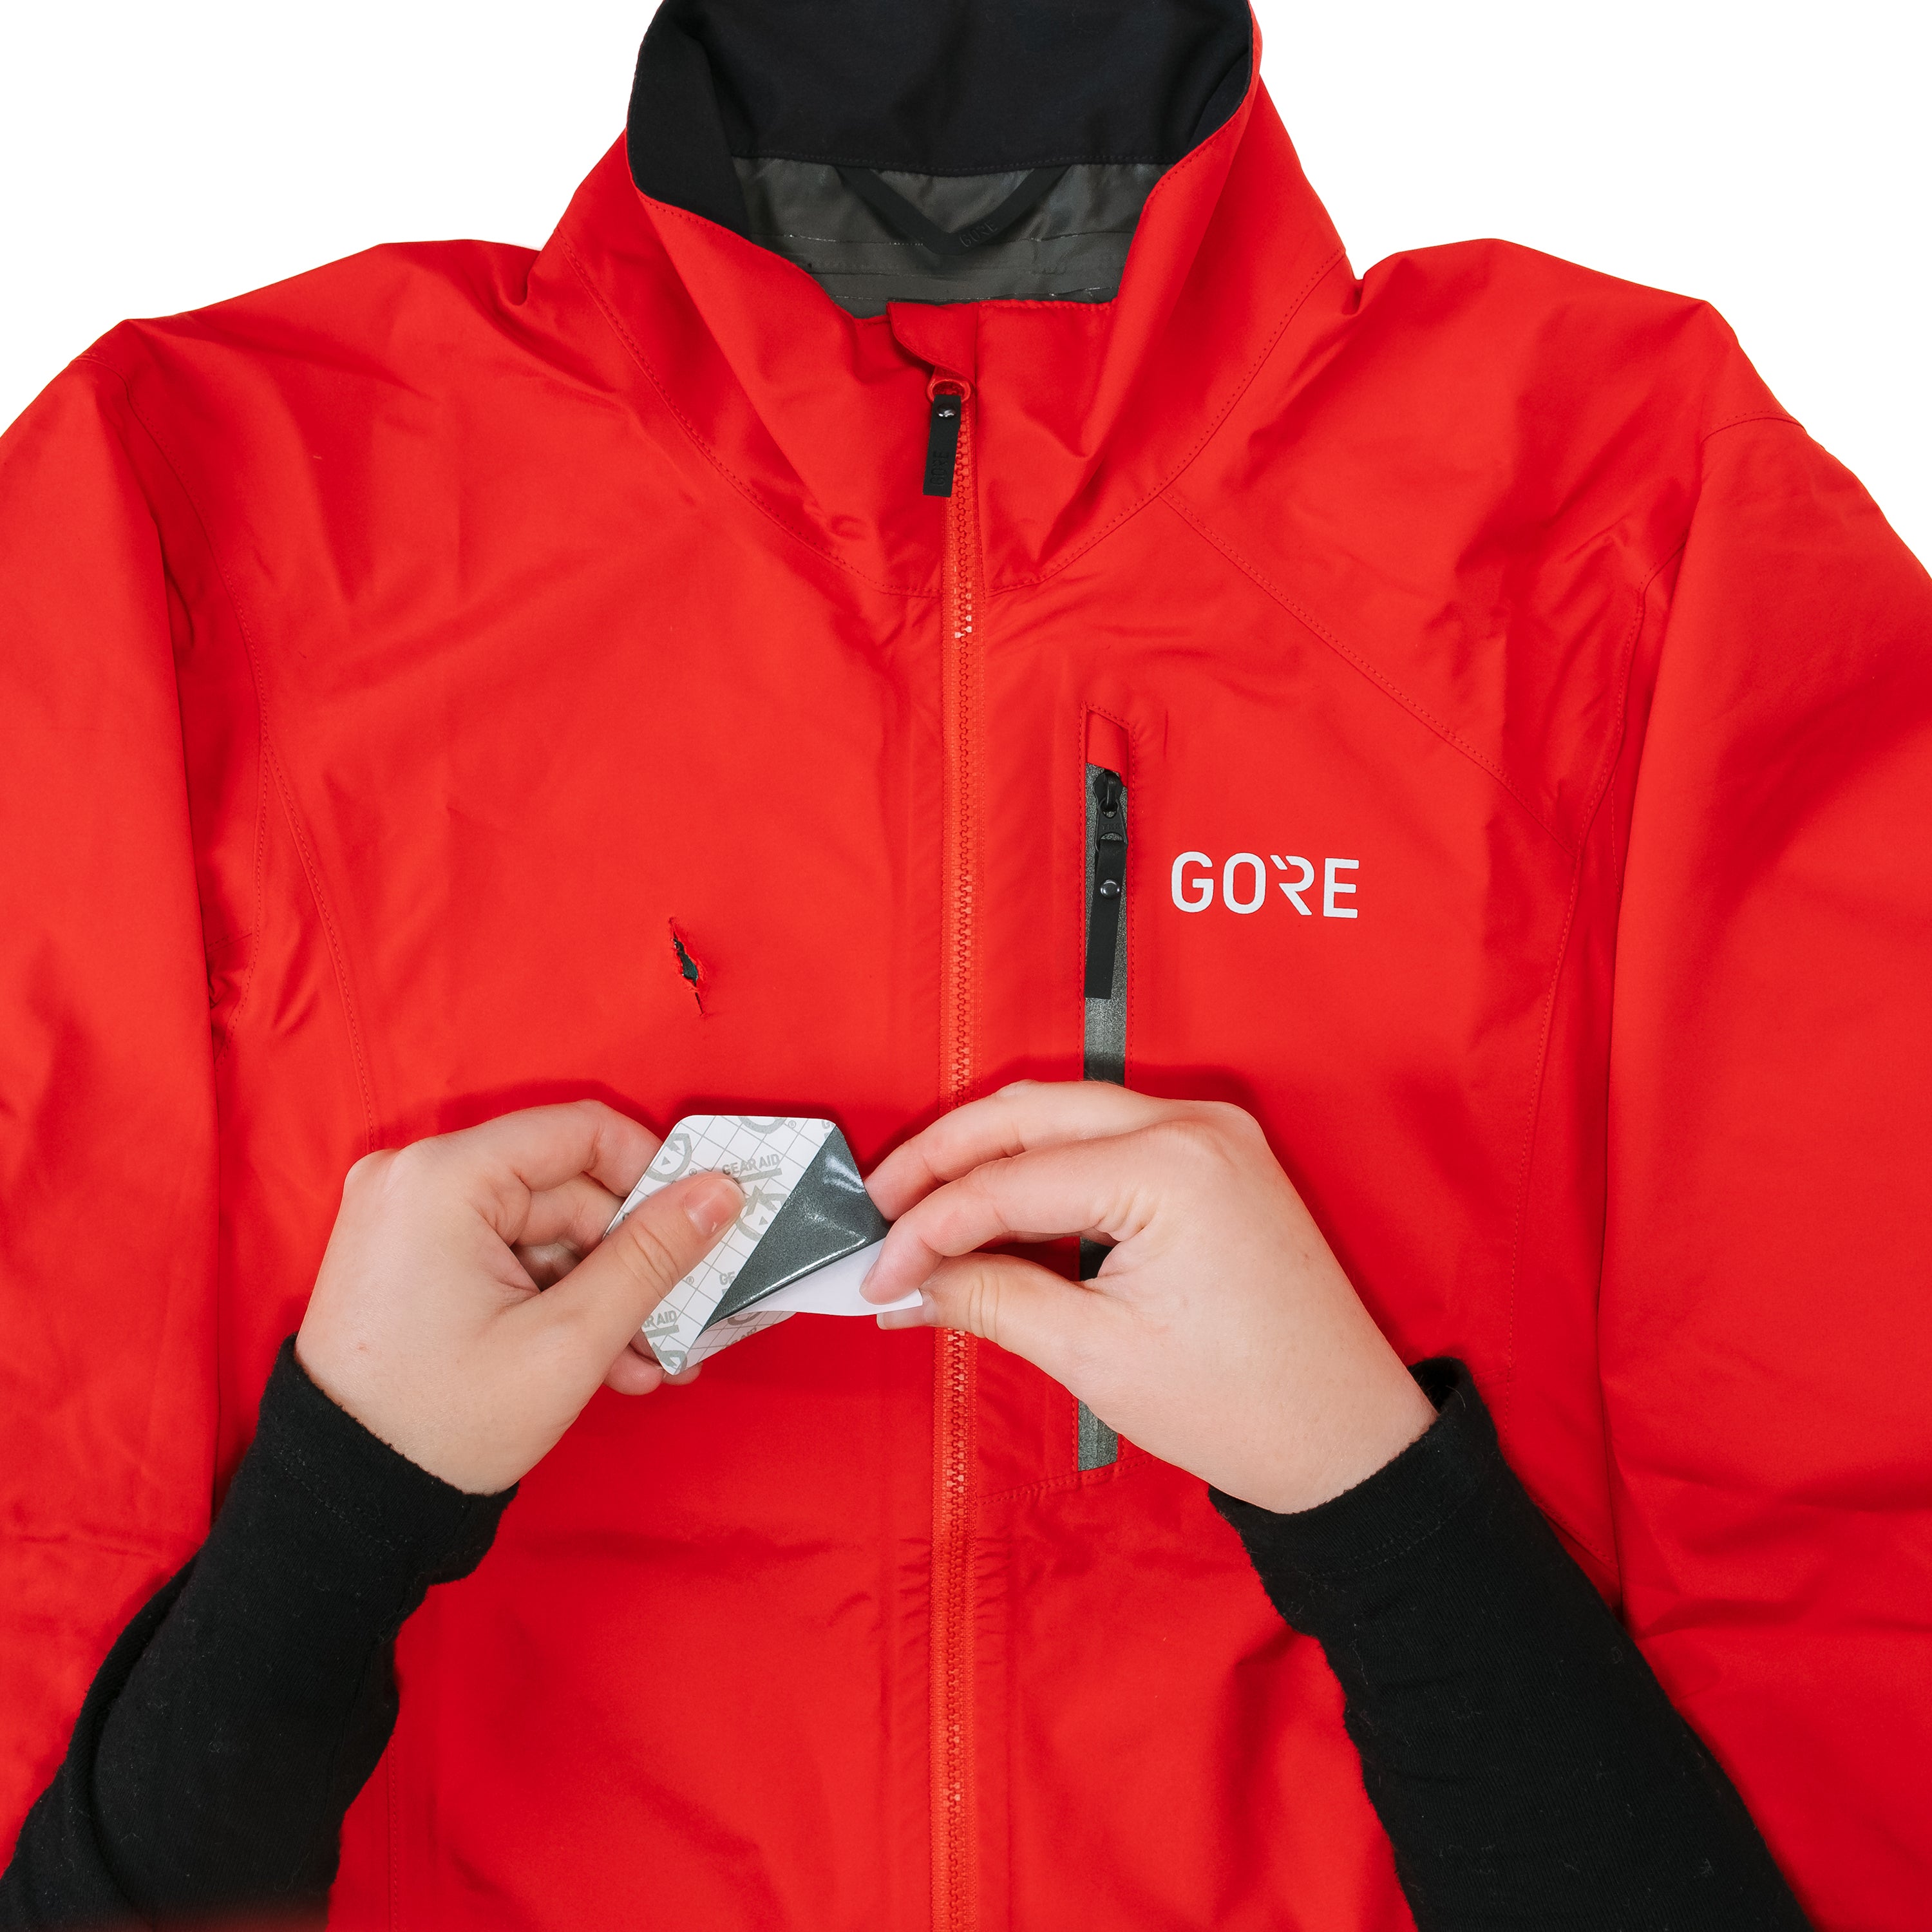 Gear Aid GORE-TEX Fabric Patches: 2.5 Hex and 4 Rectangle